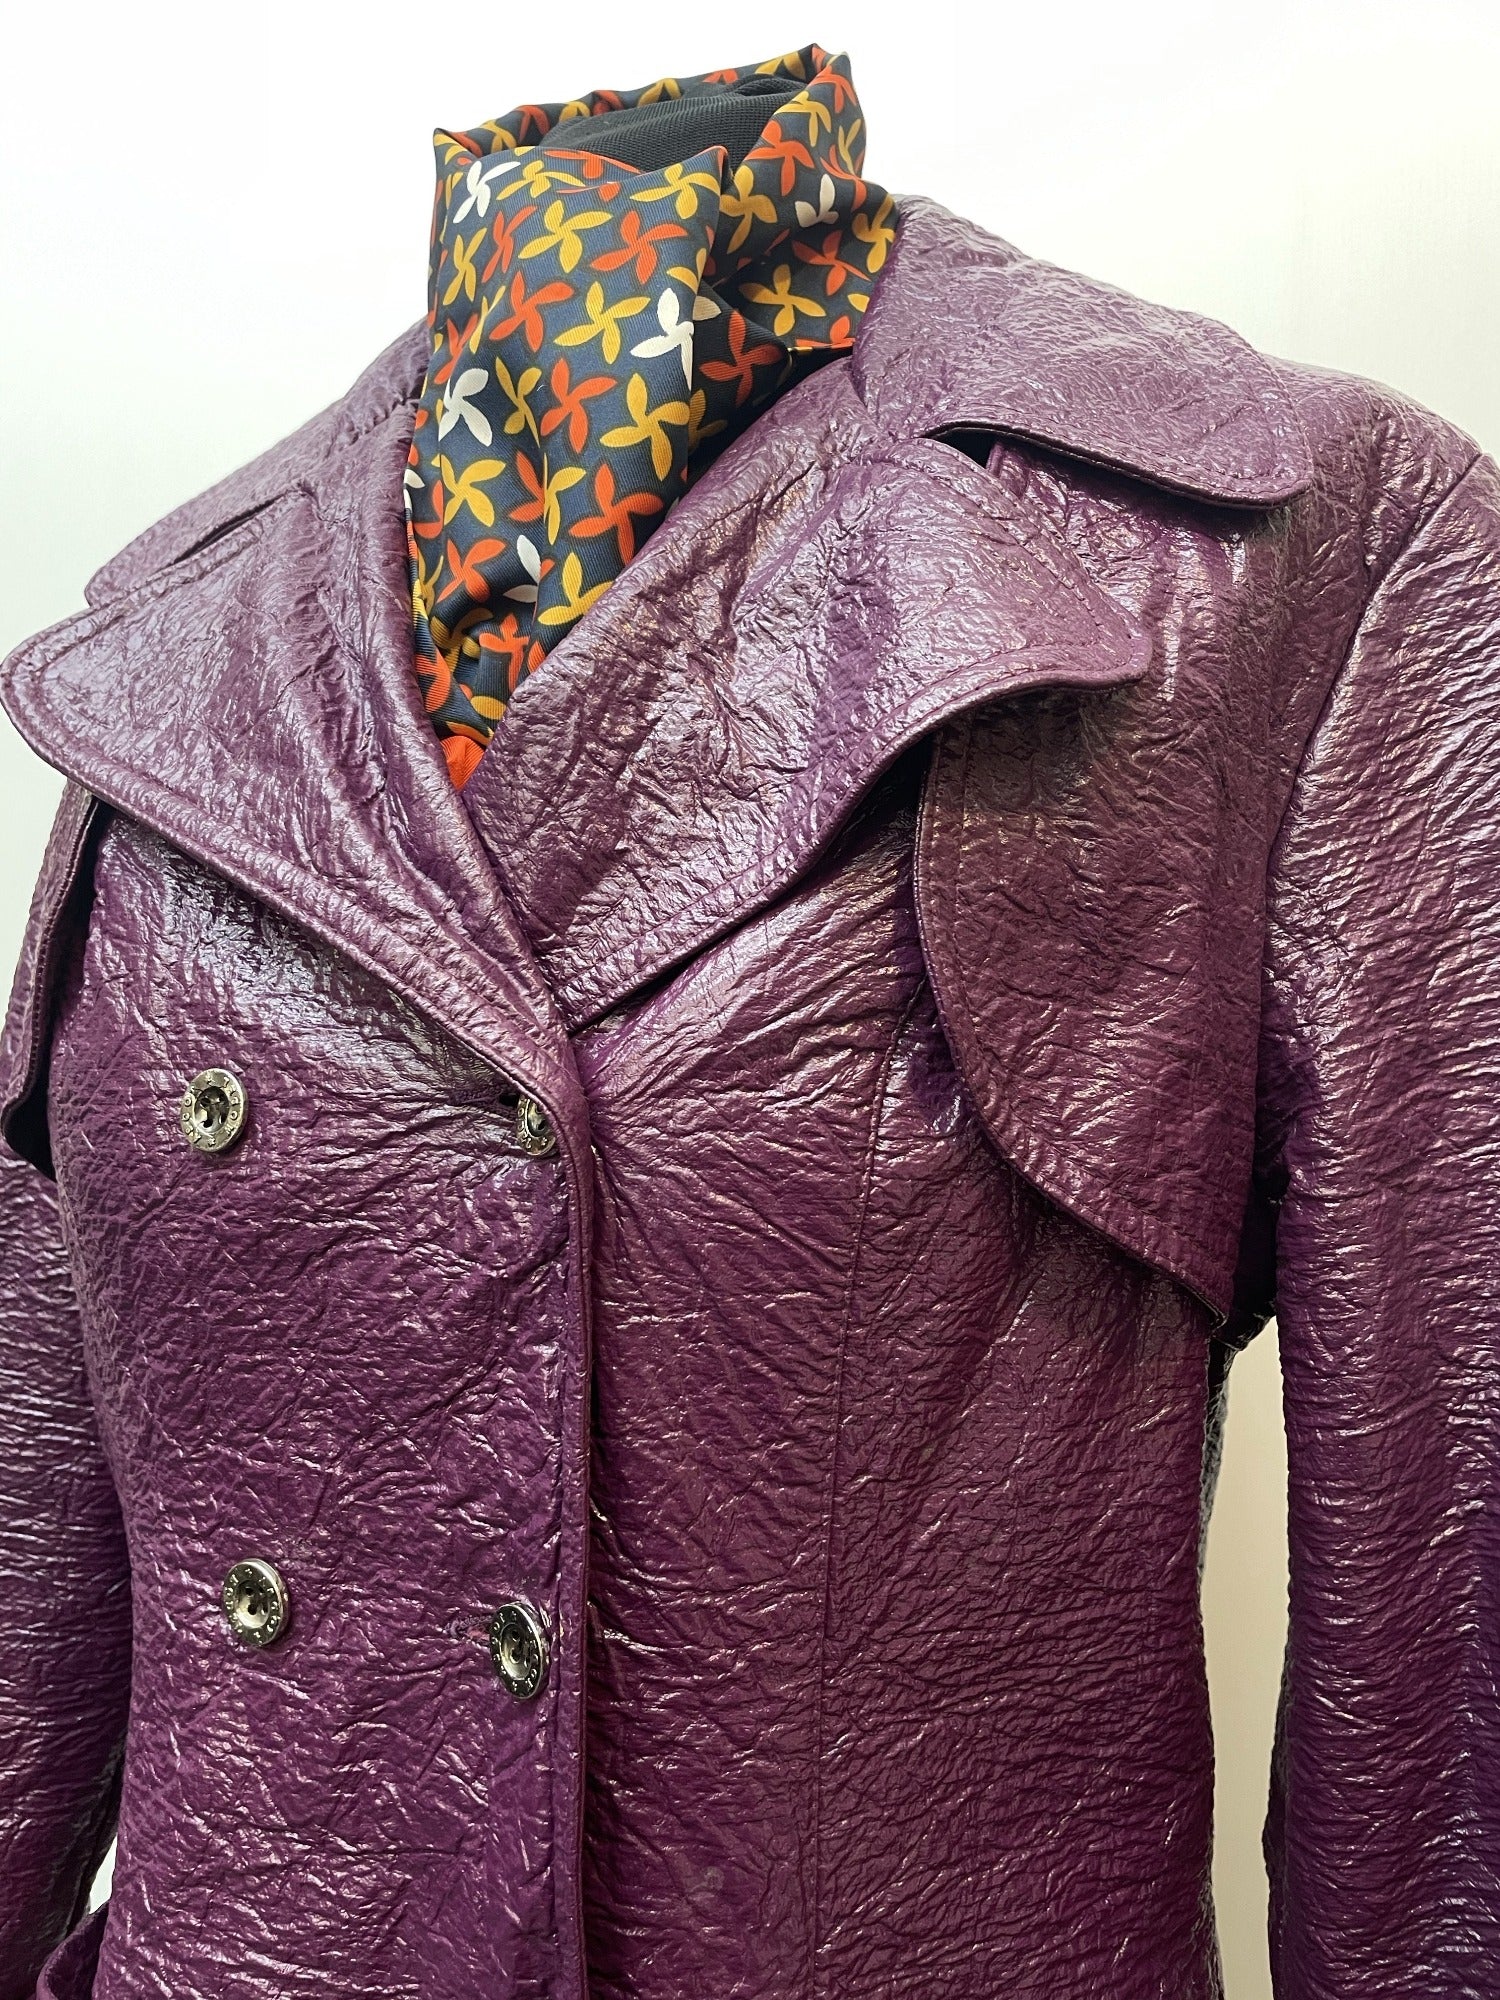 womens jacket  womens coat  womens  Vinyl PVC  vintage  Urban Village Vintage  purple  Leather  Jacket  double breasted coat  double breasted  decorative buttons  70s  60s  3/4  1970s  1960s  12